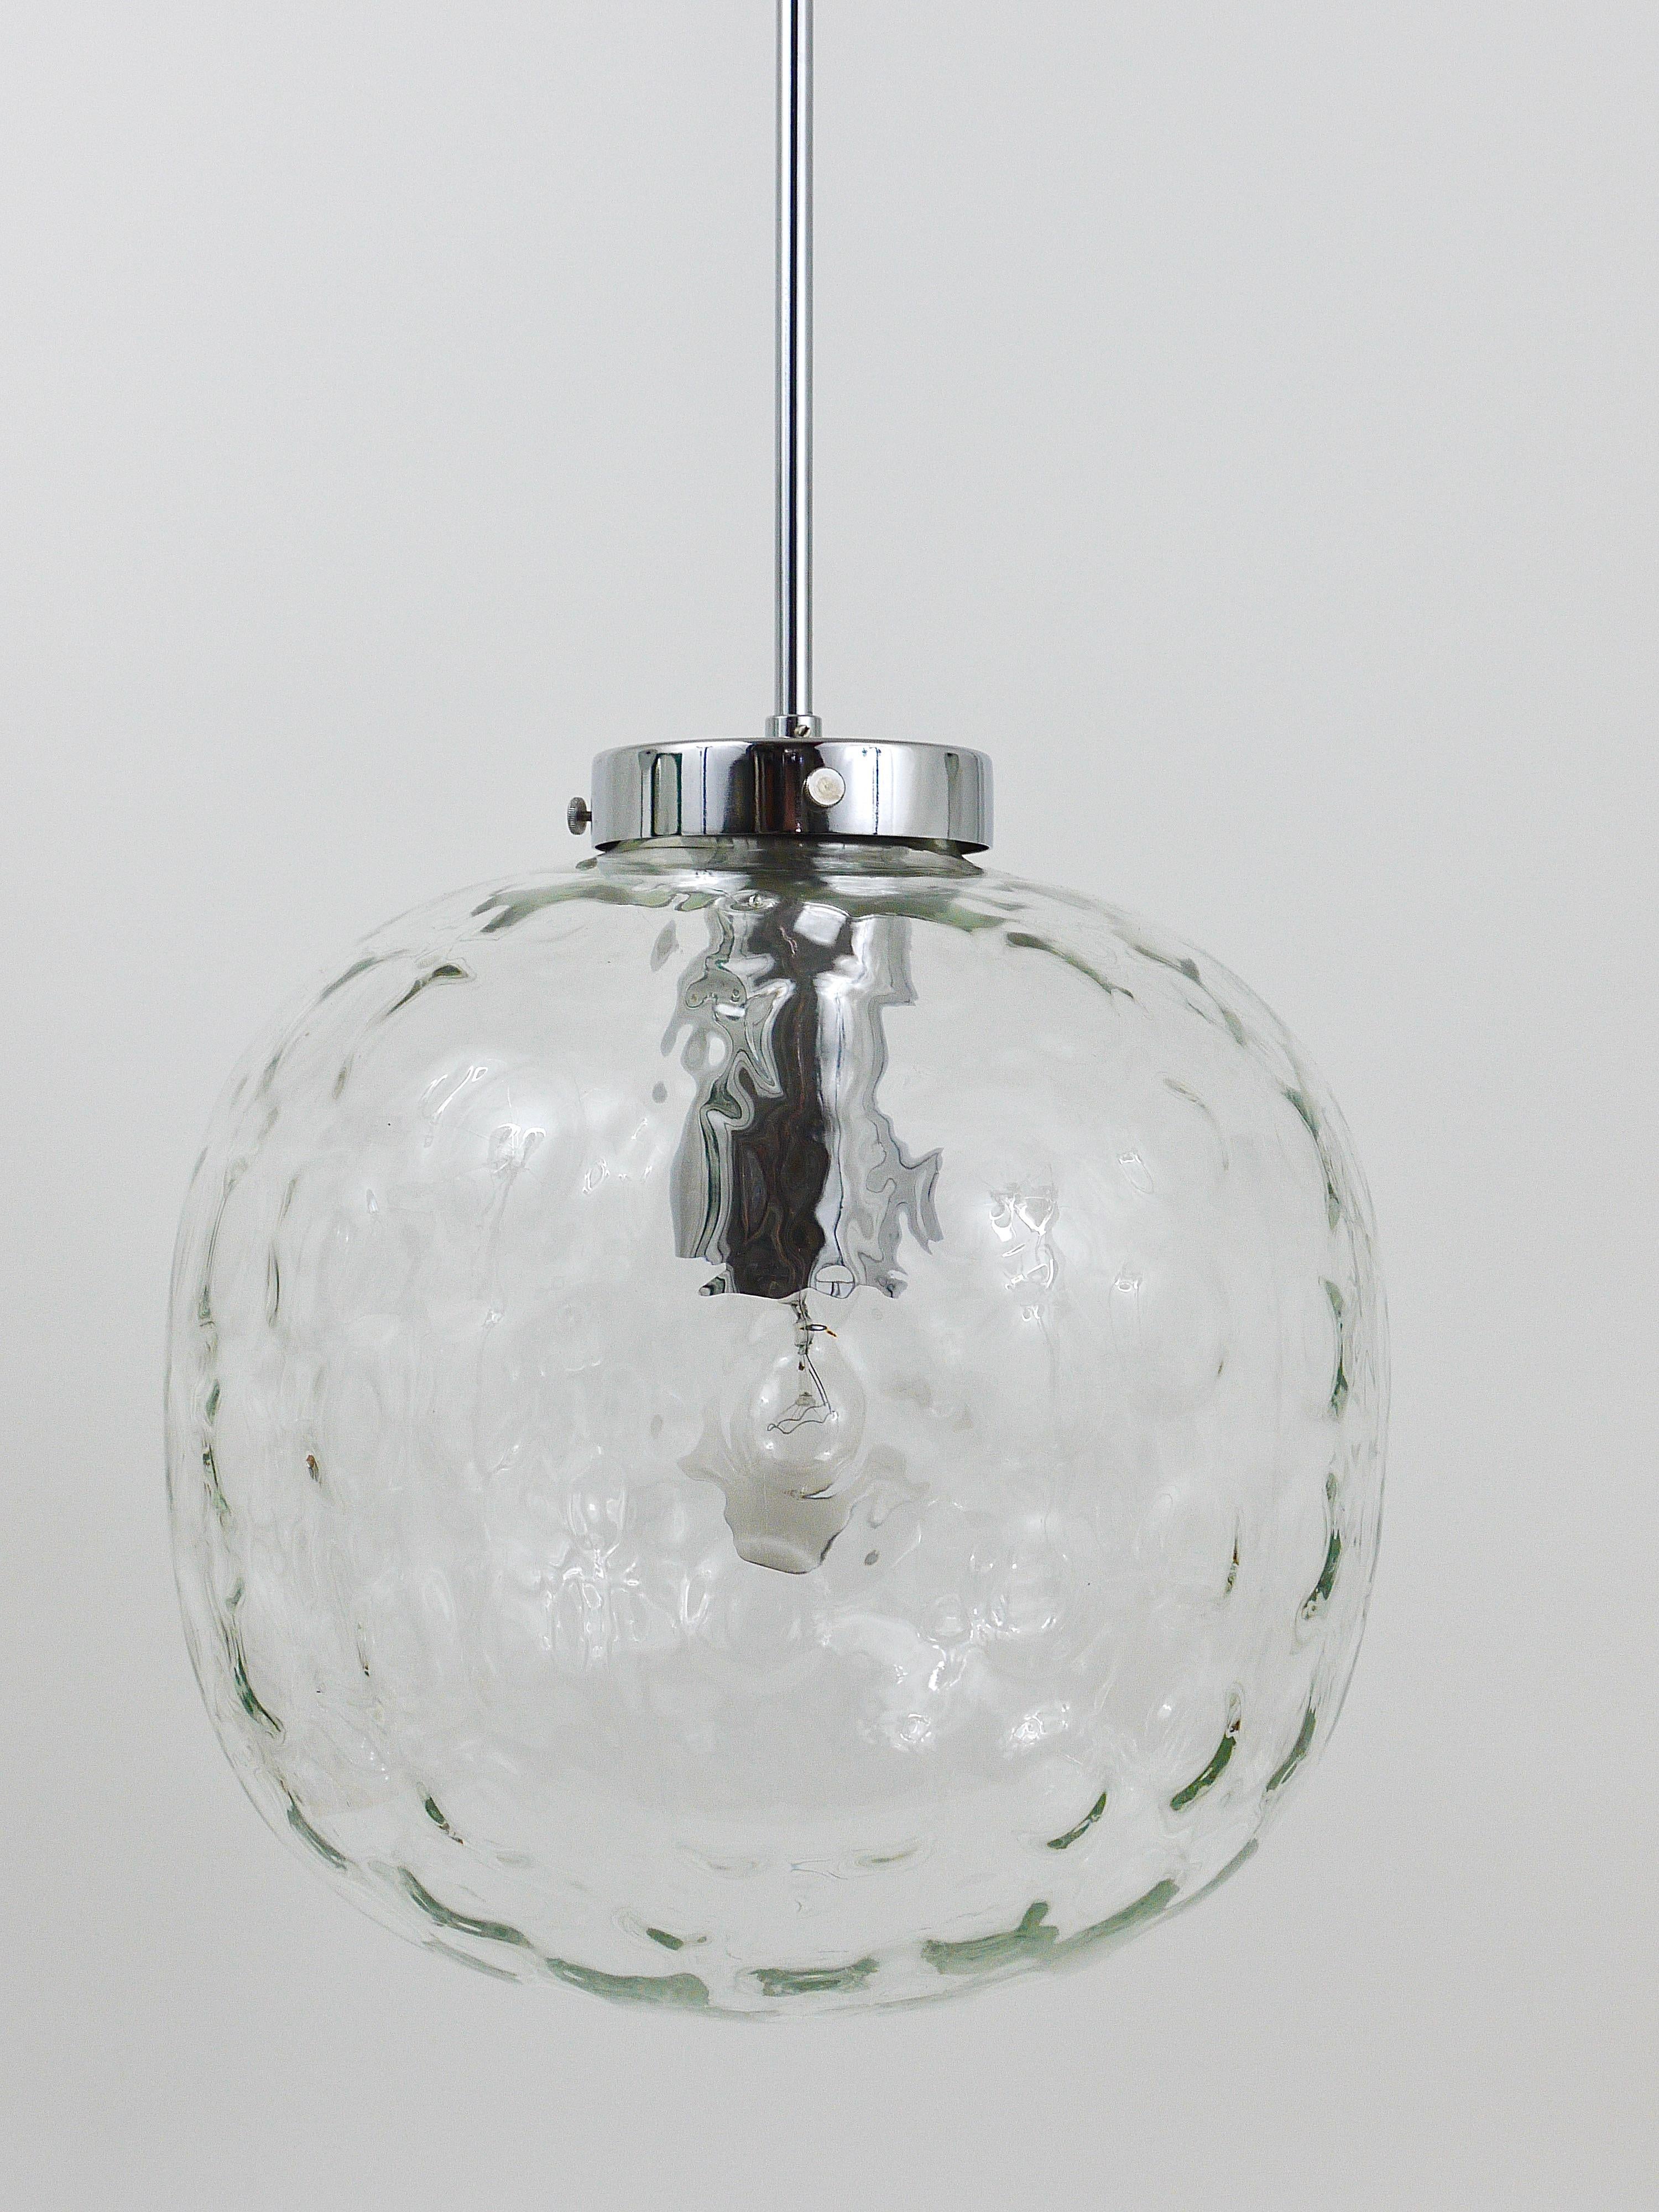 Large Bubble Melting Glass and Chrome Globe Pendant Lamp, Germany, 1970s For Sale 8